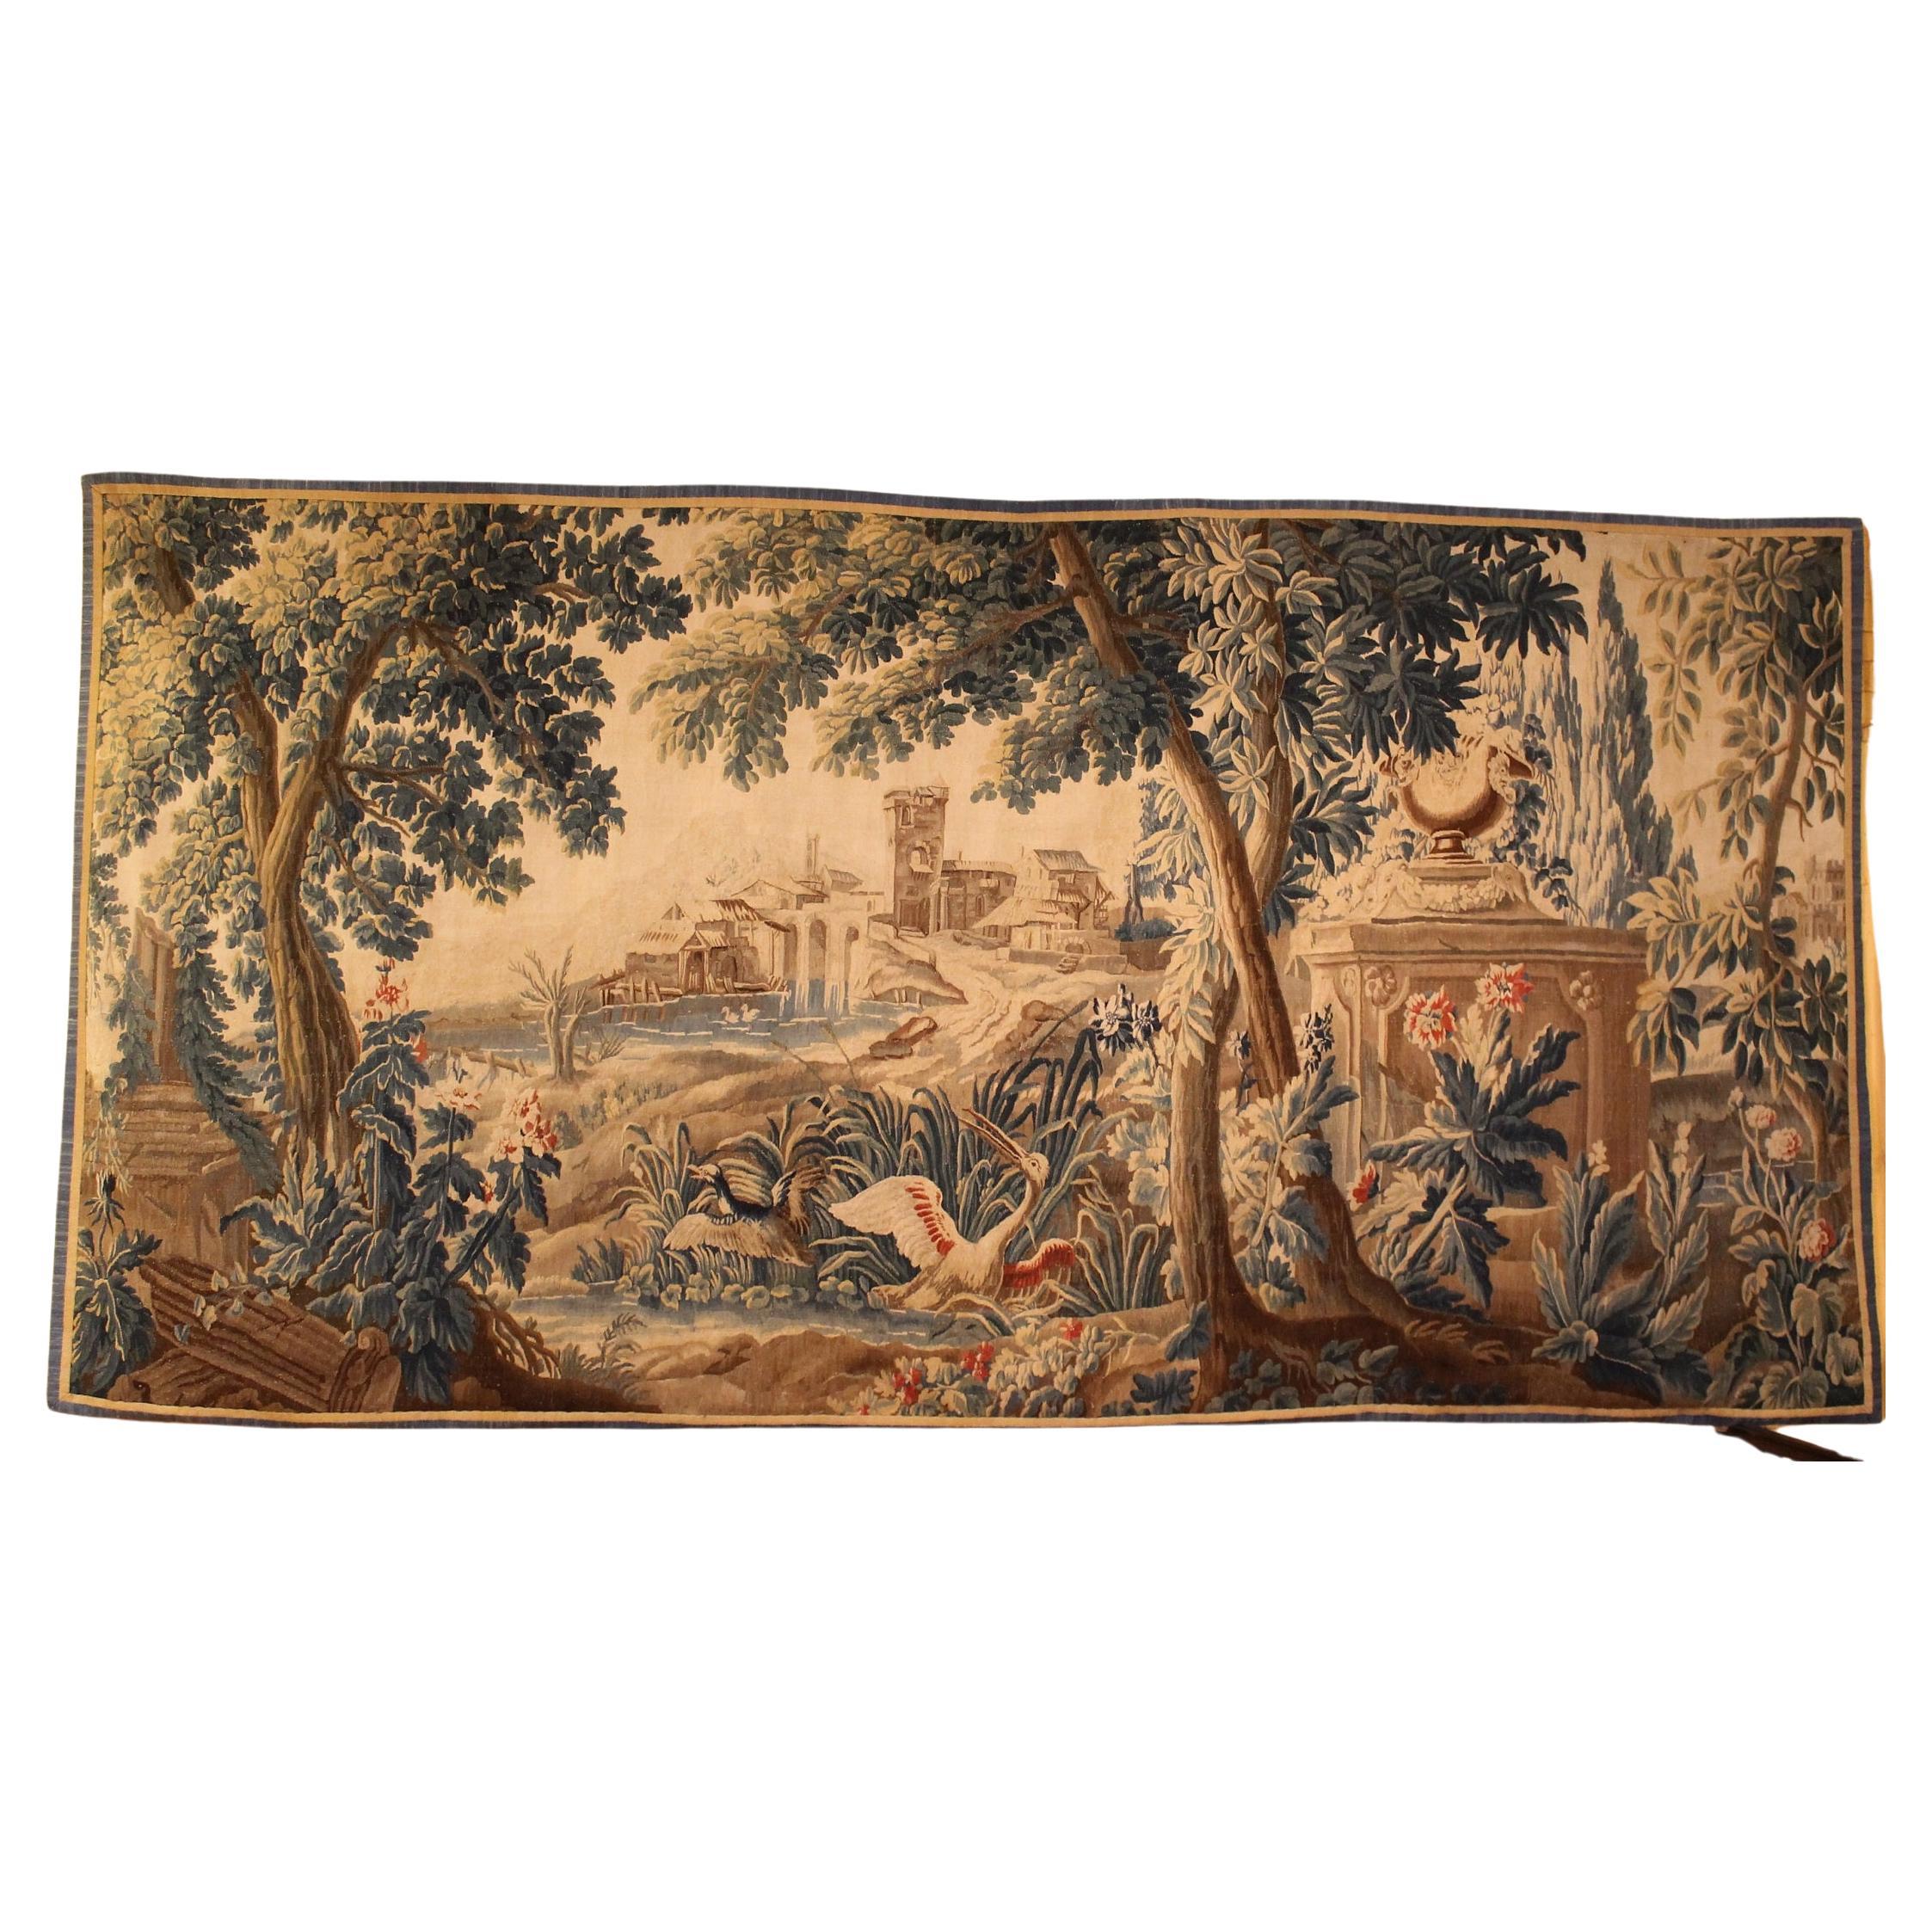 Aubusson Tapestry Late 17th Century, France